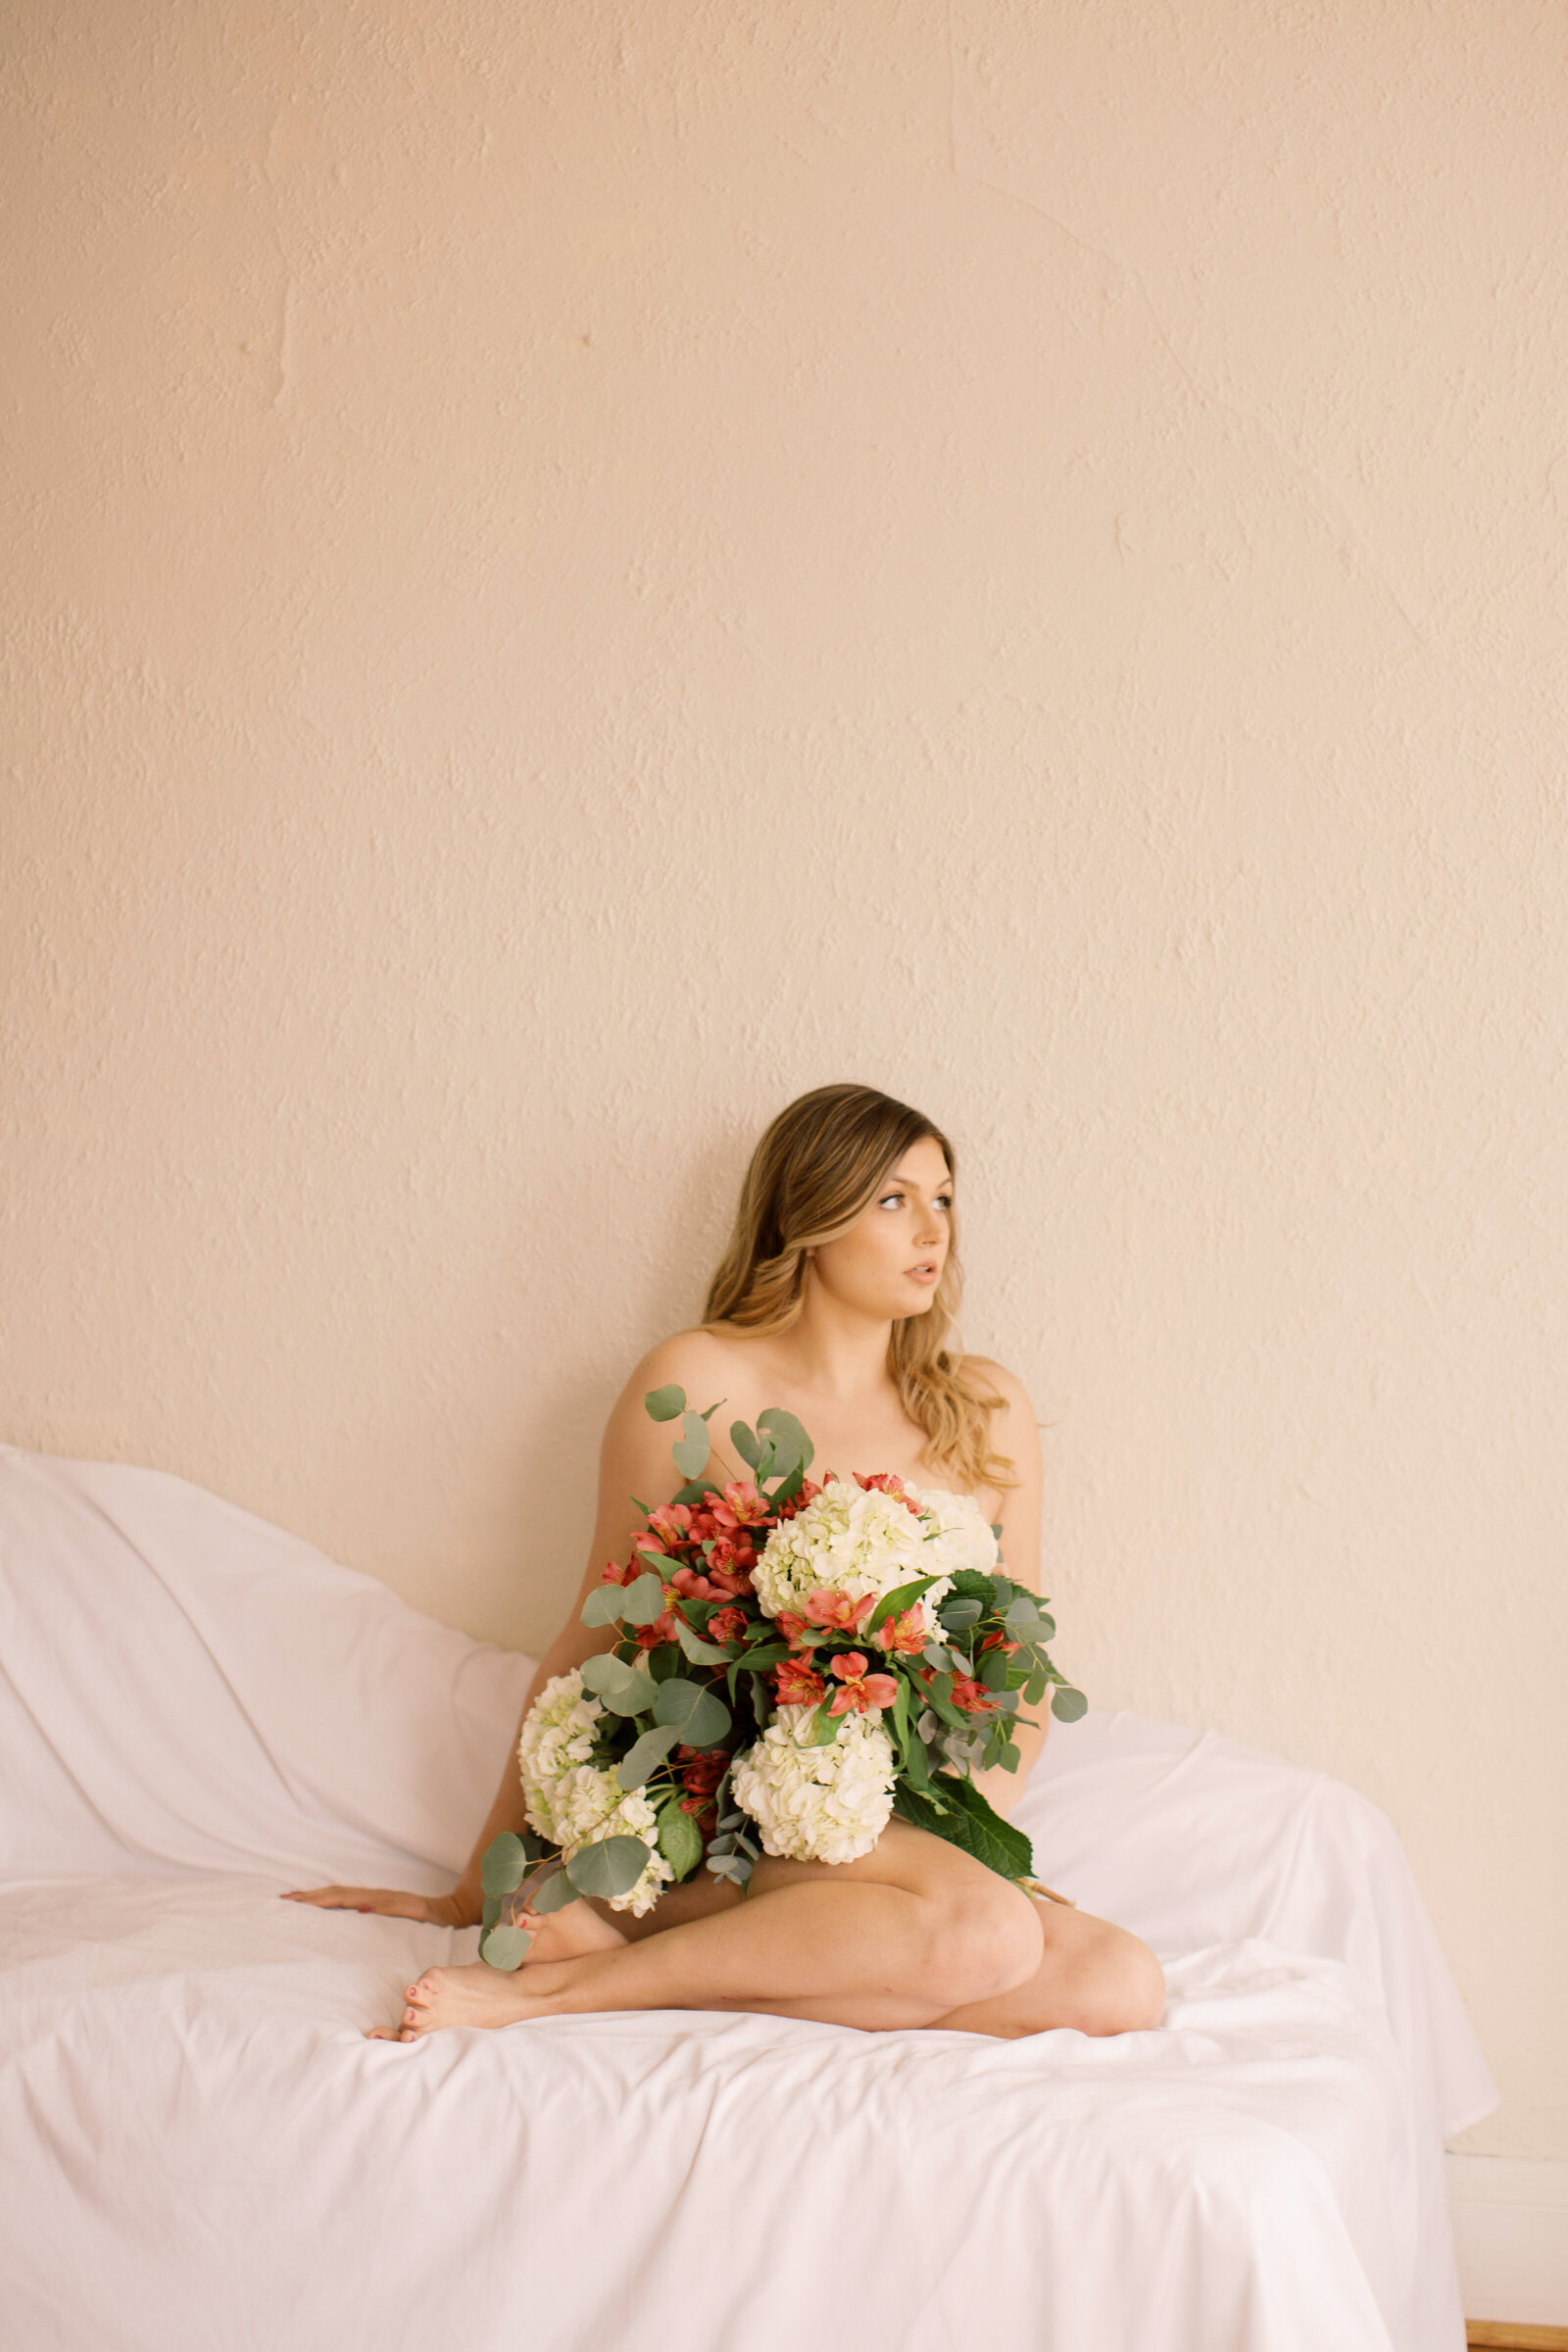 Woman sitting on a bed holding bouquet of flowers